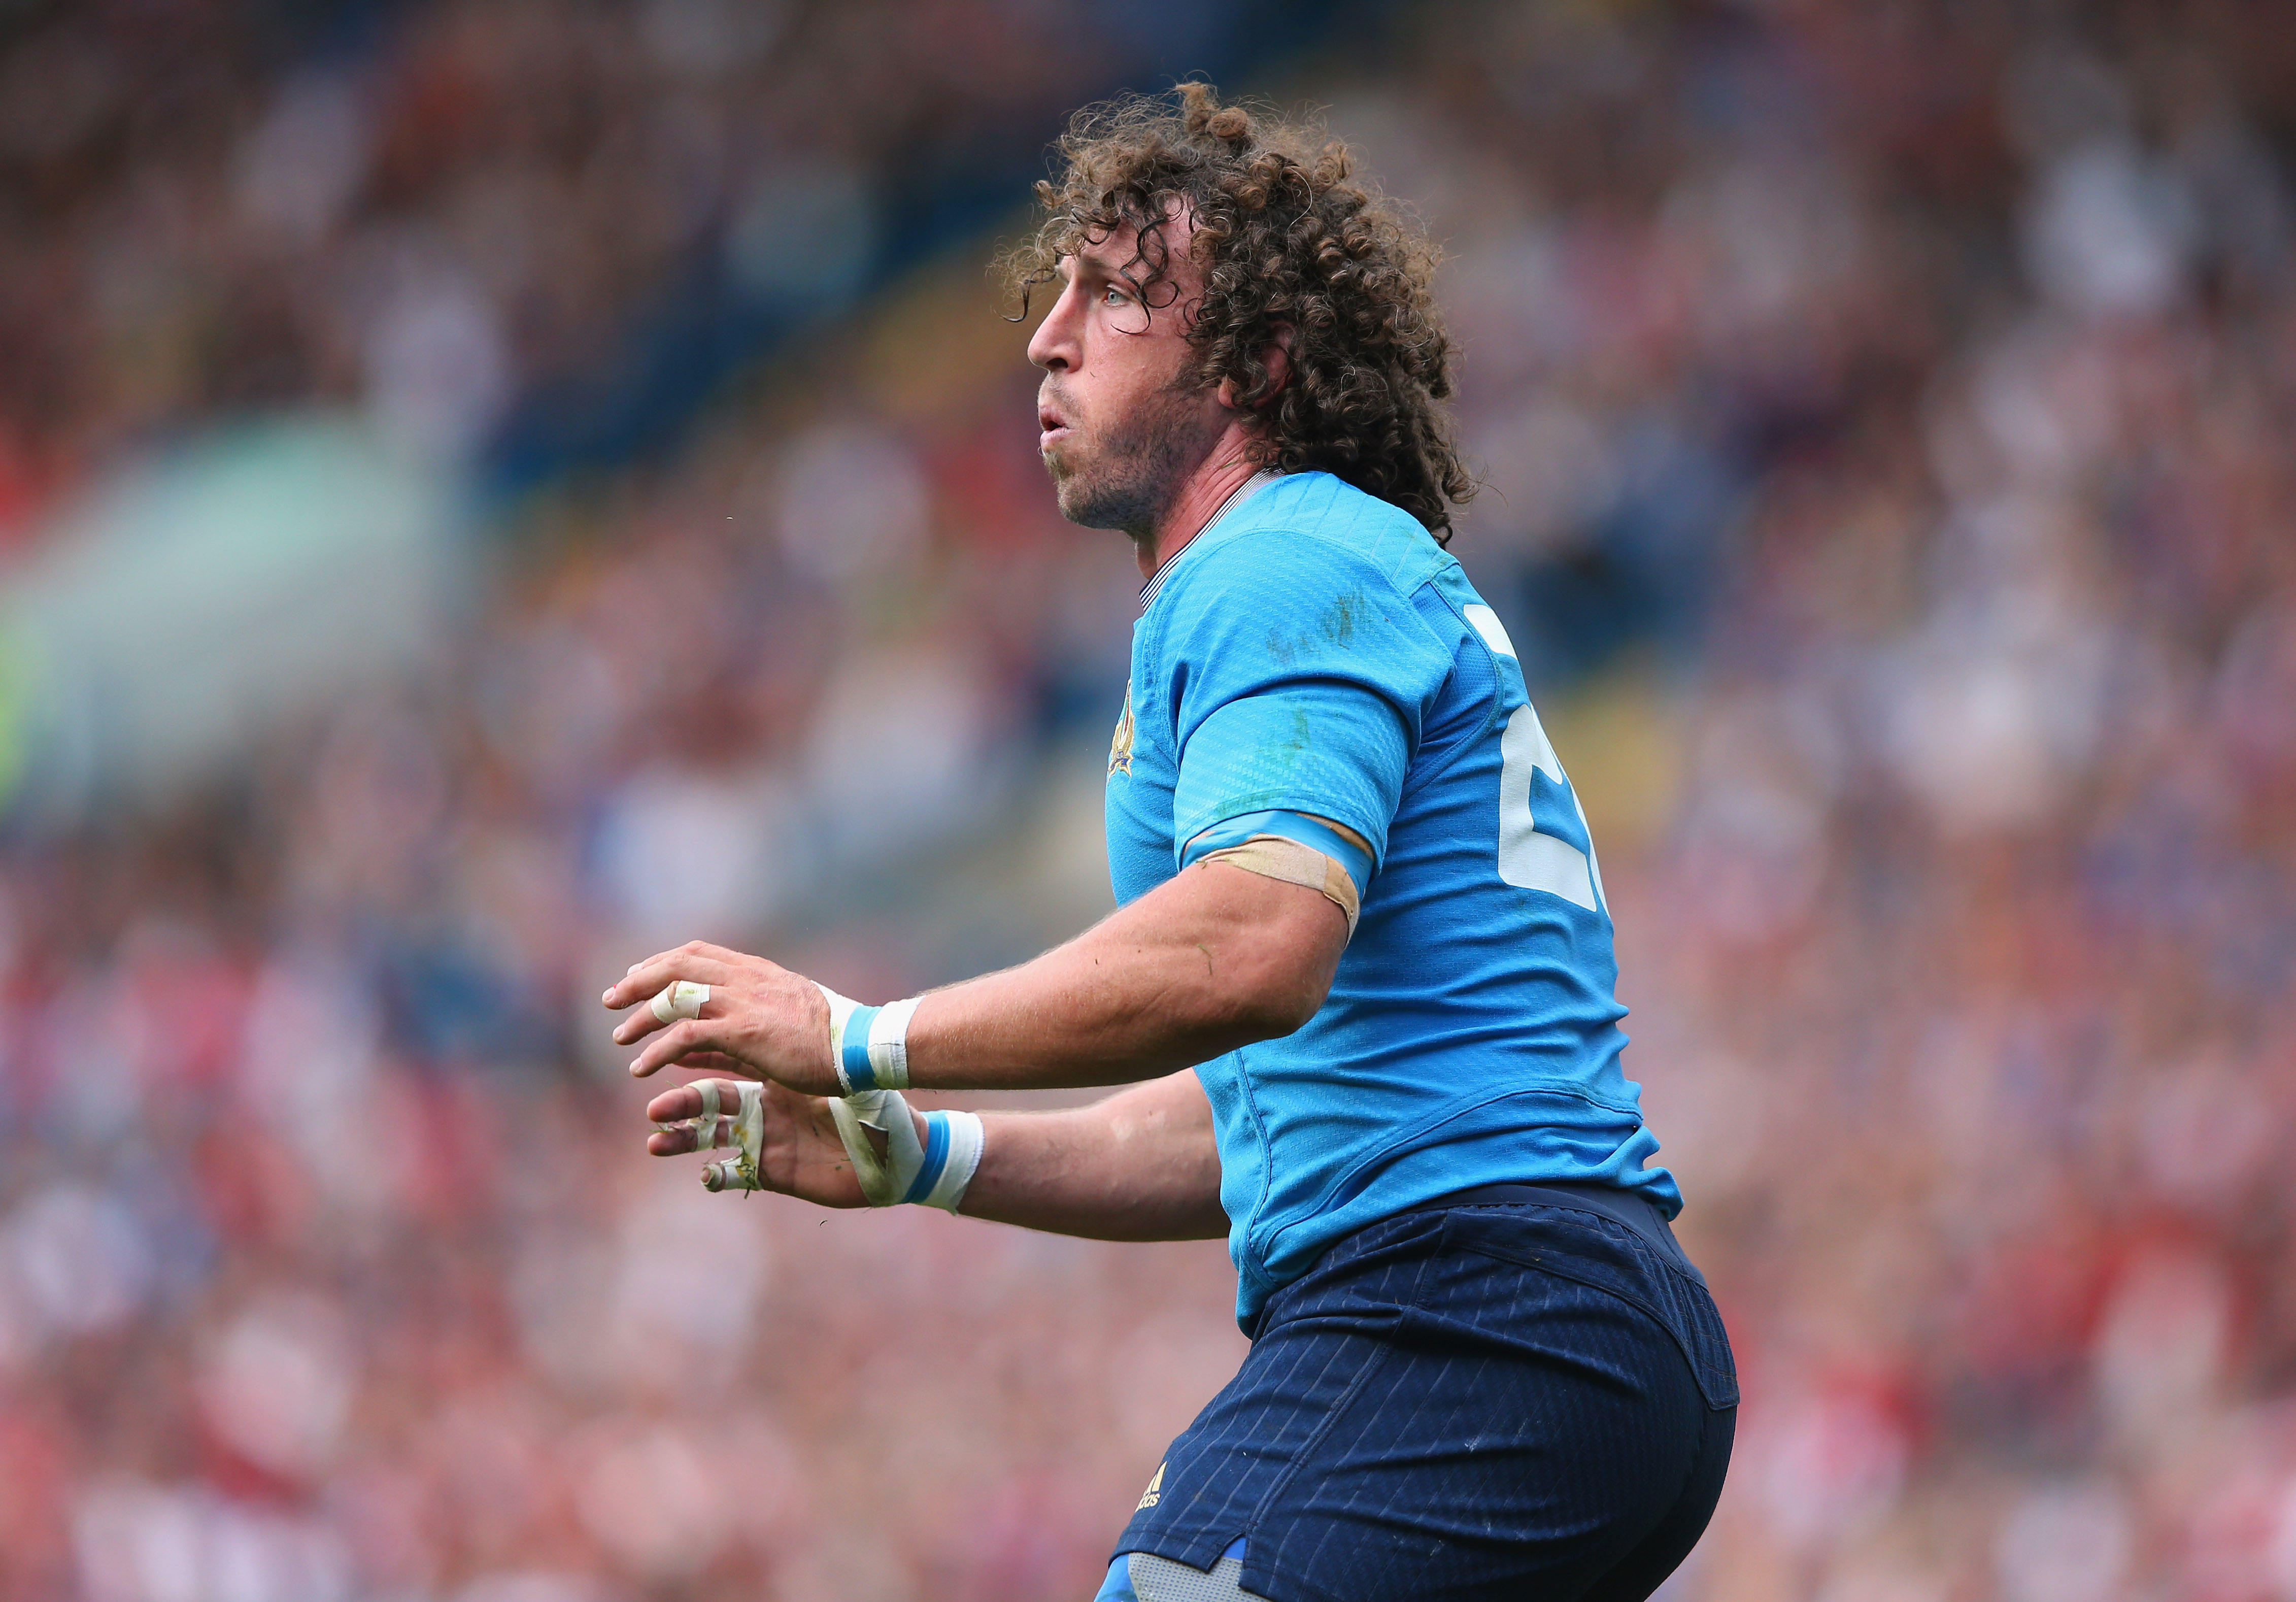 LEEDS, ENGLAND - SEPTEMBER 26:  Mauro Bergamasco of Italy looks on during the 2015 Rugby World Cup Pool D match between Italy and Canada at Elland Road on September 26, 2015 in Leeds, United Kingdom.  (Photo by Alex Livesey/Getty Images)